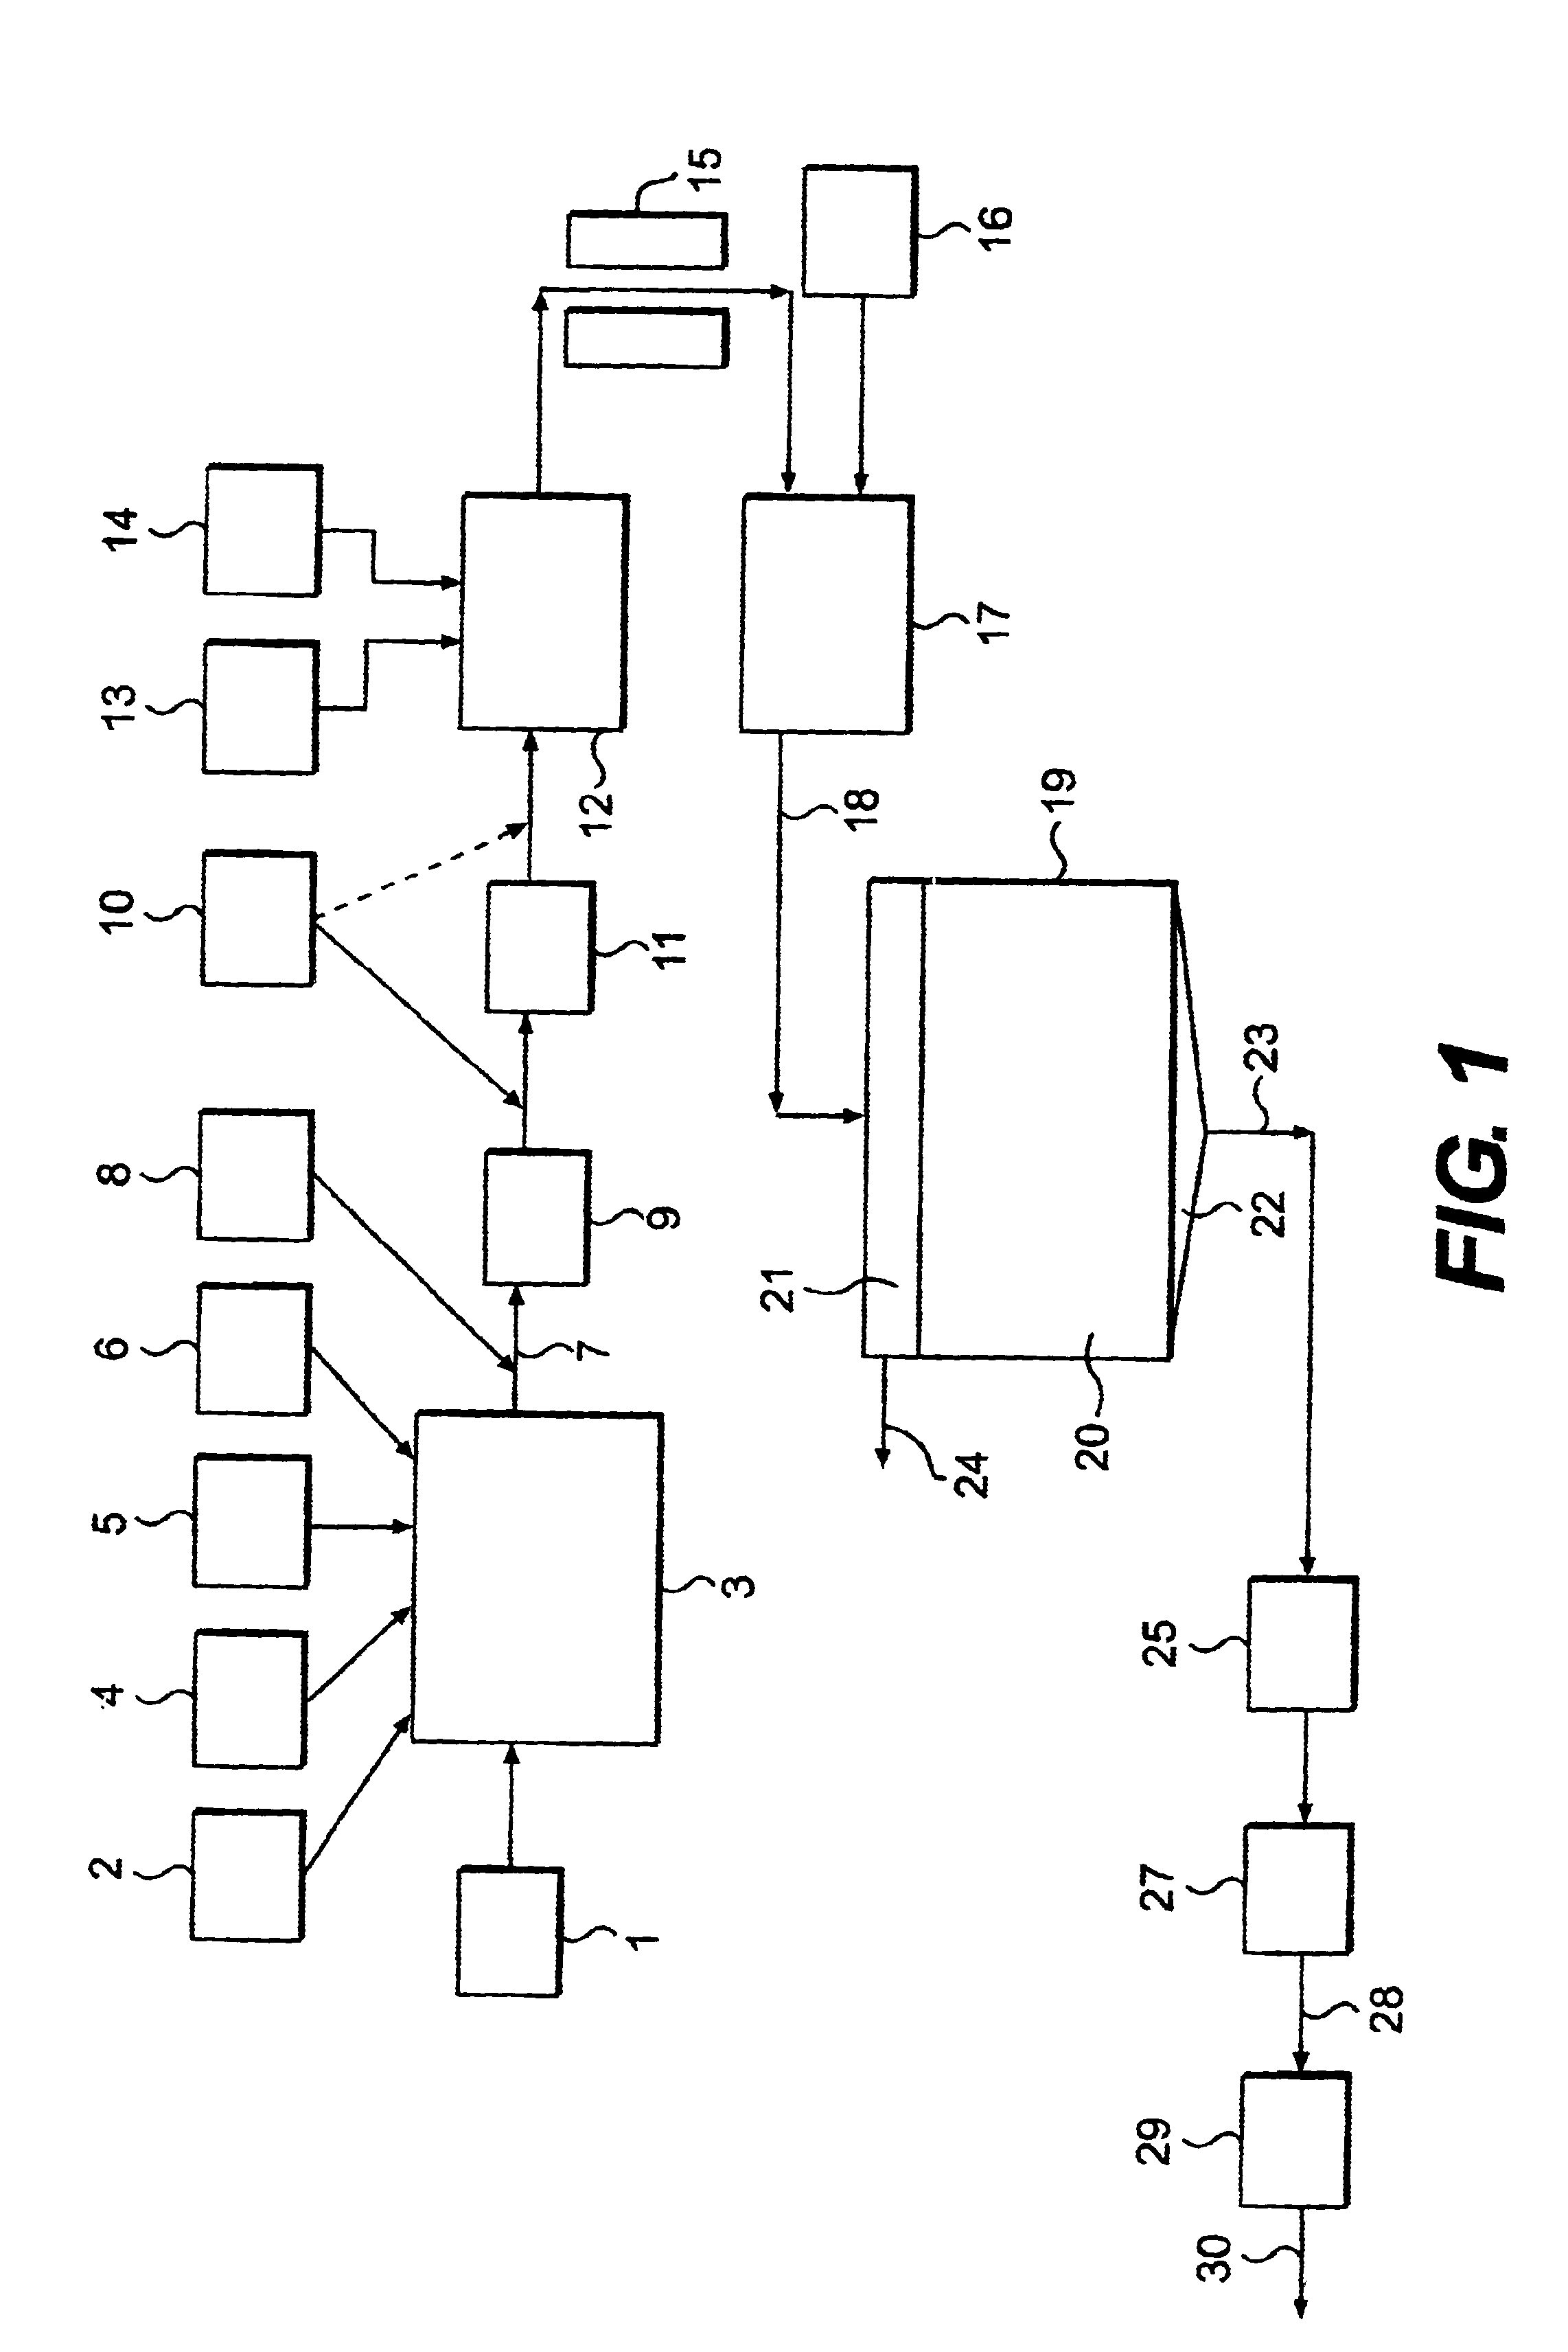 Method of treating an aqueous suspension of kaolin